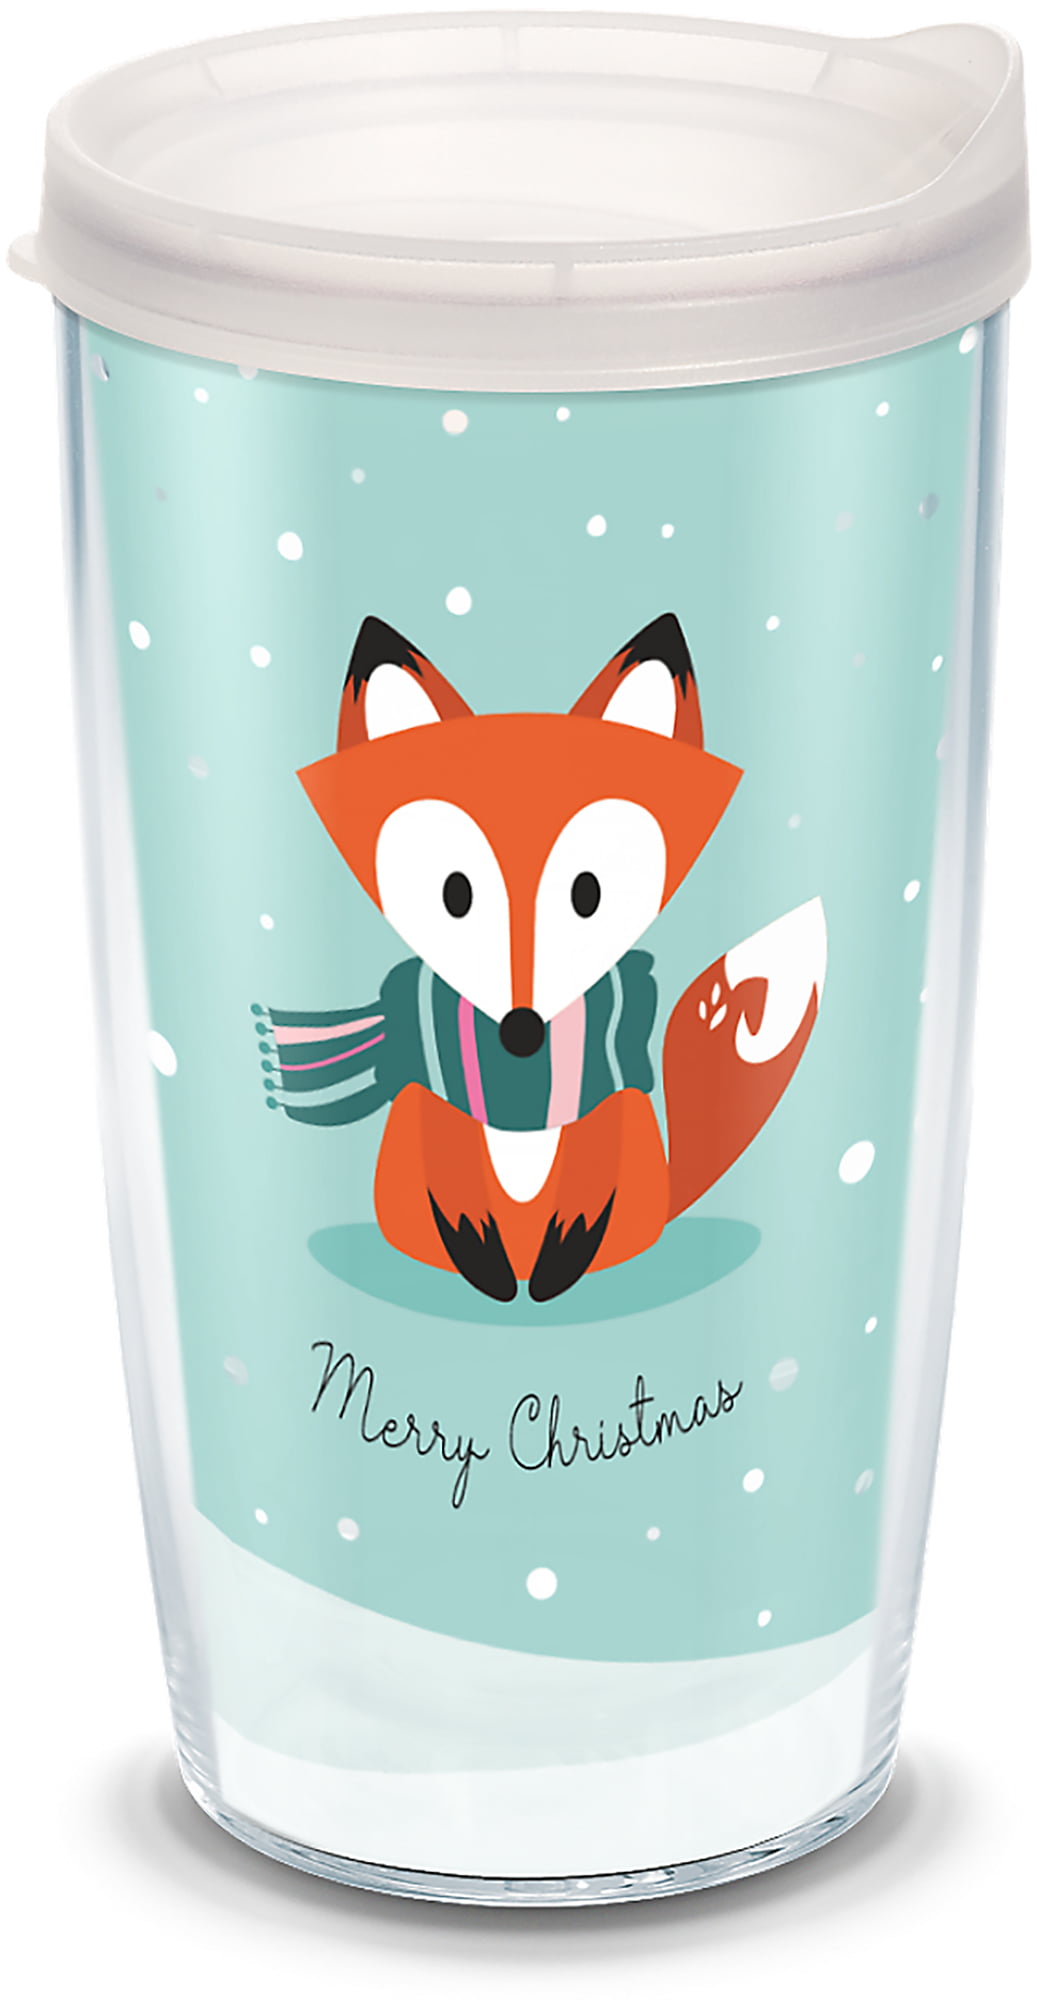 Personalized Tumbler Cup insulated hot/cold 20oz - The Glass Fox